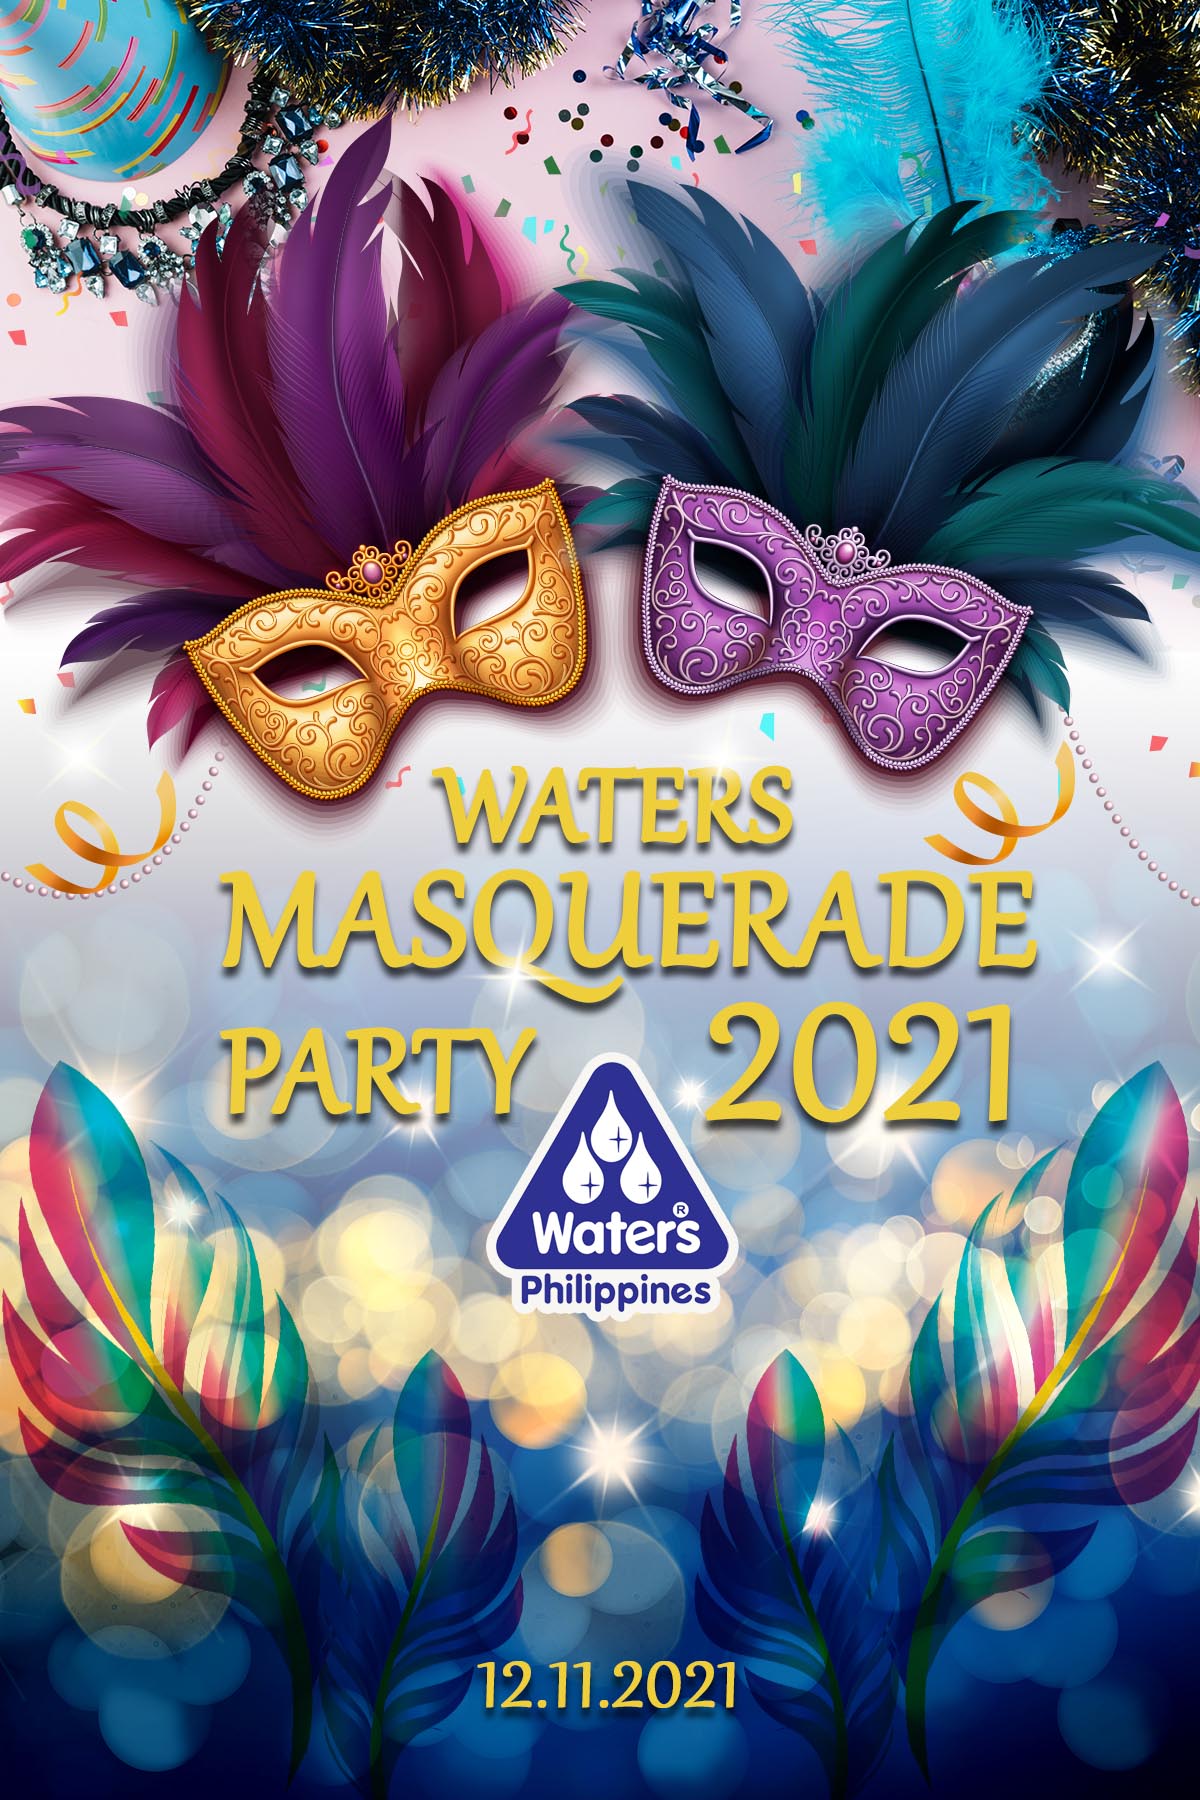 Waters Masquerade Party 2021